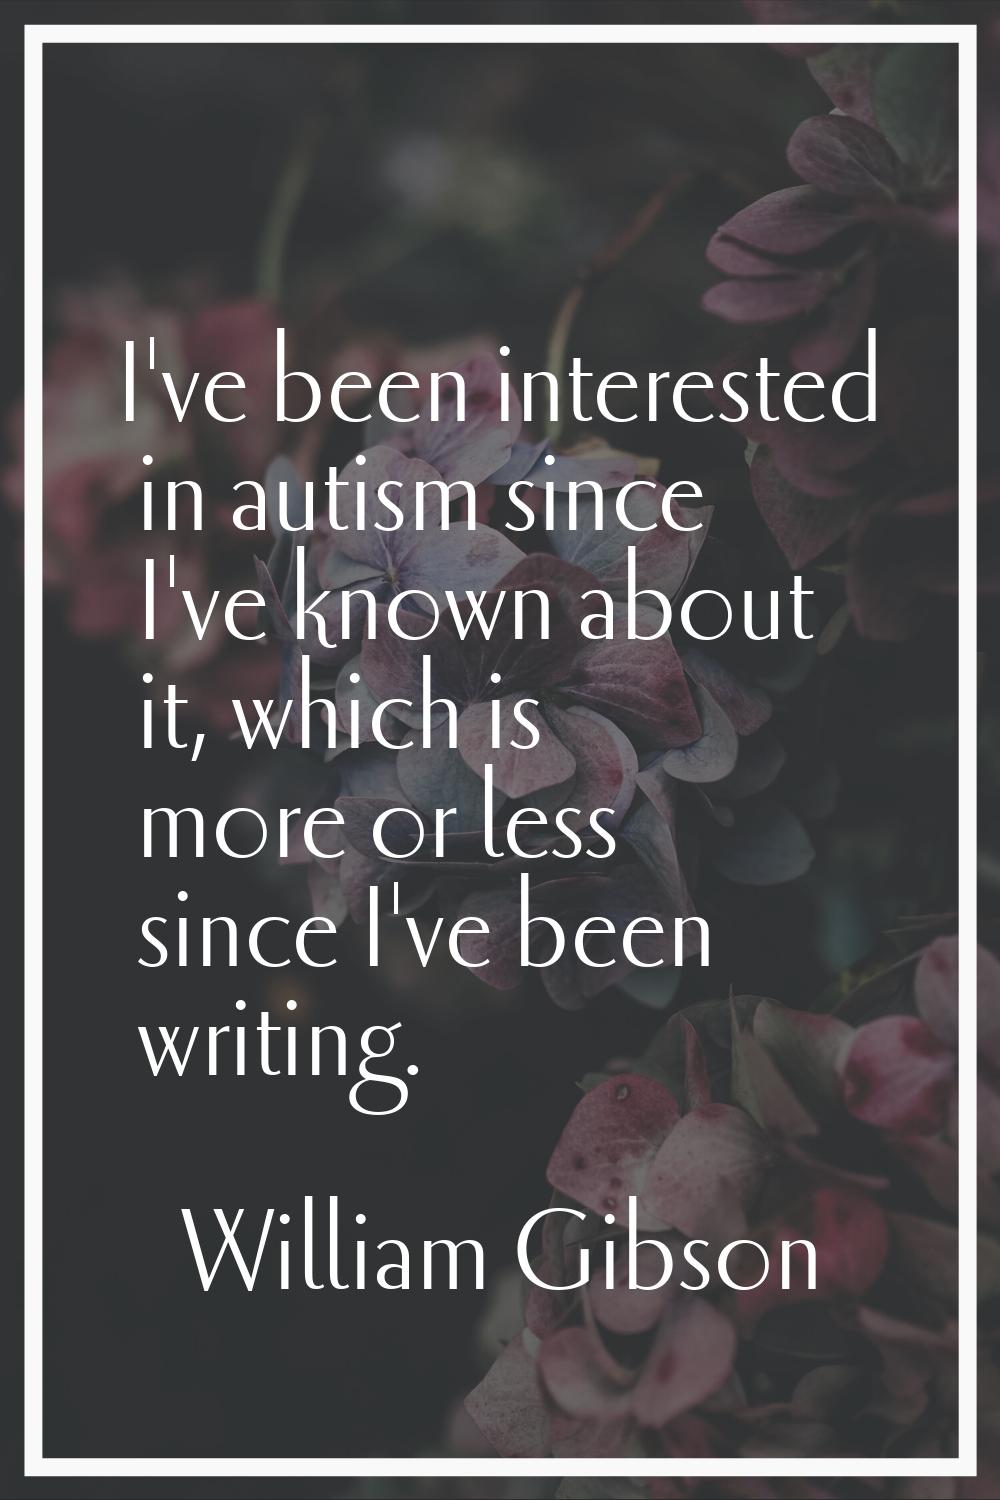 I've been interested in autism since I've known about it, which is more or less since I've been wri